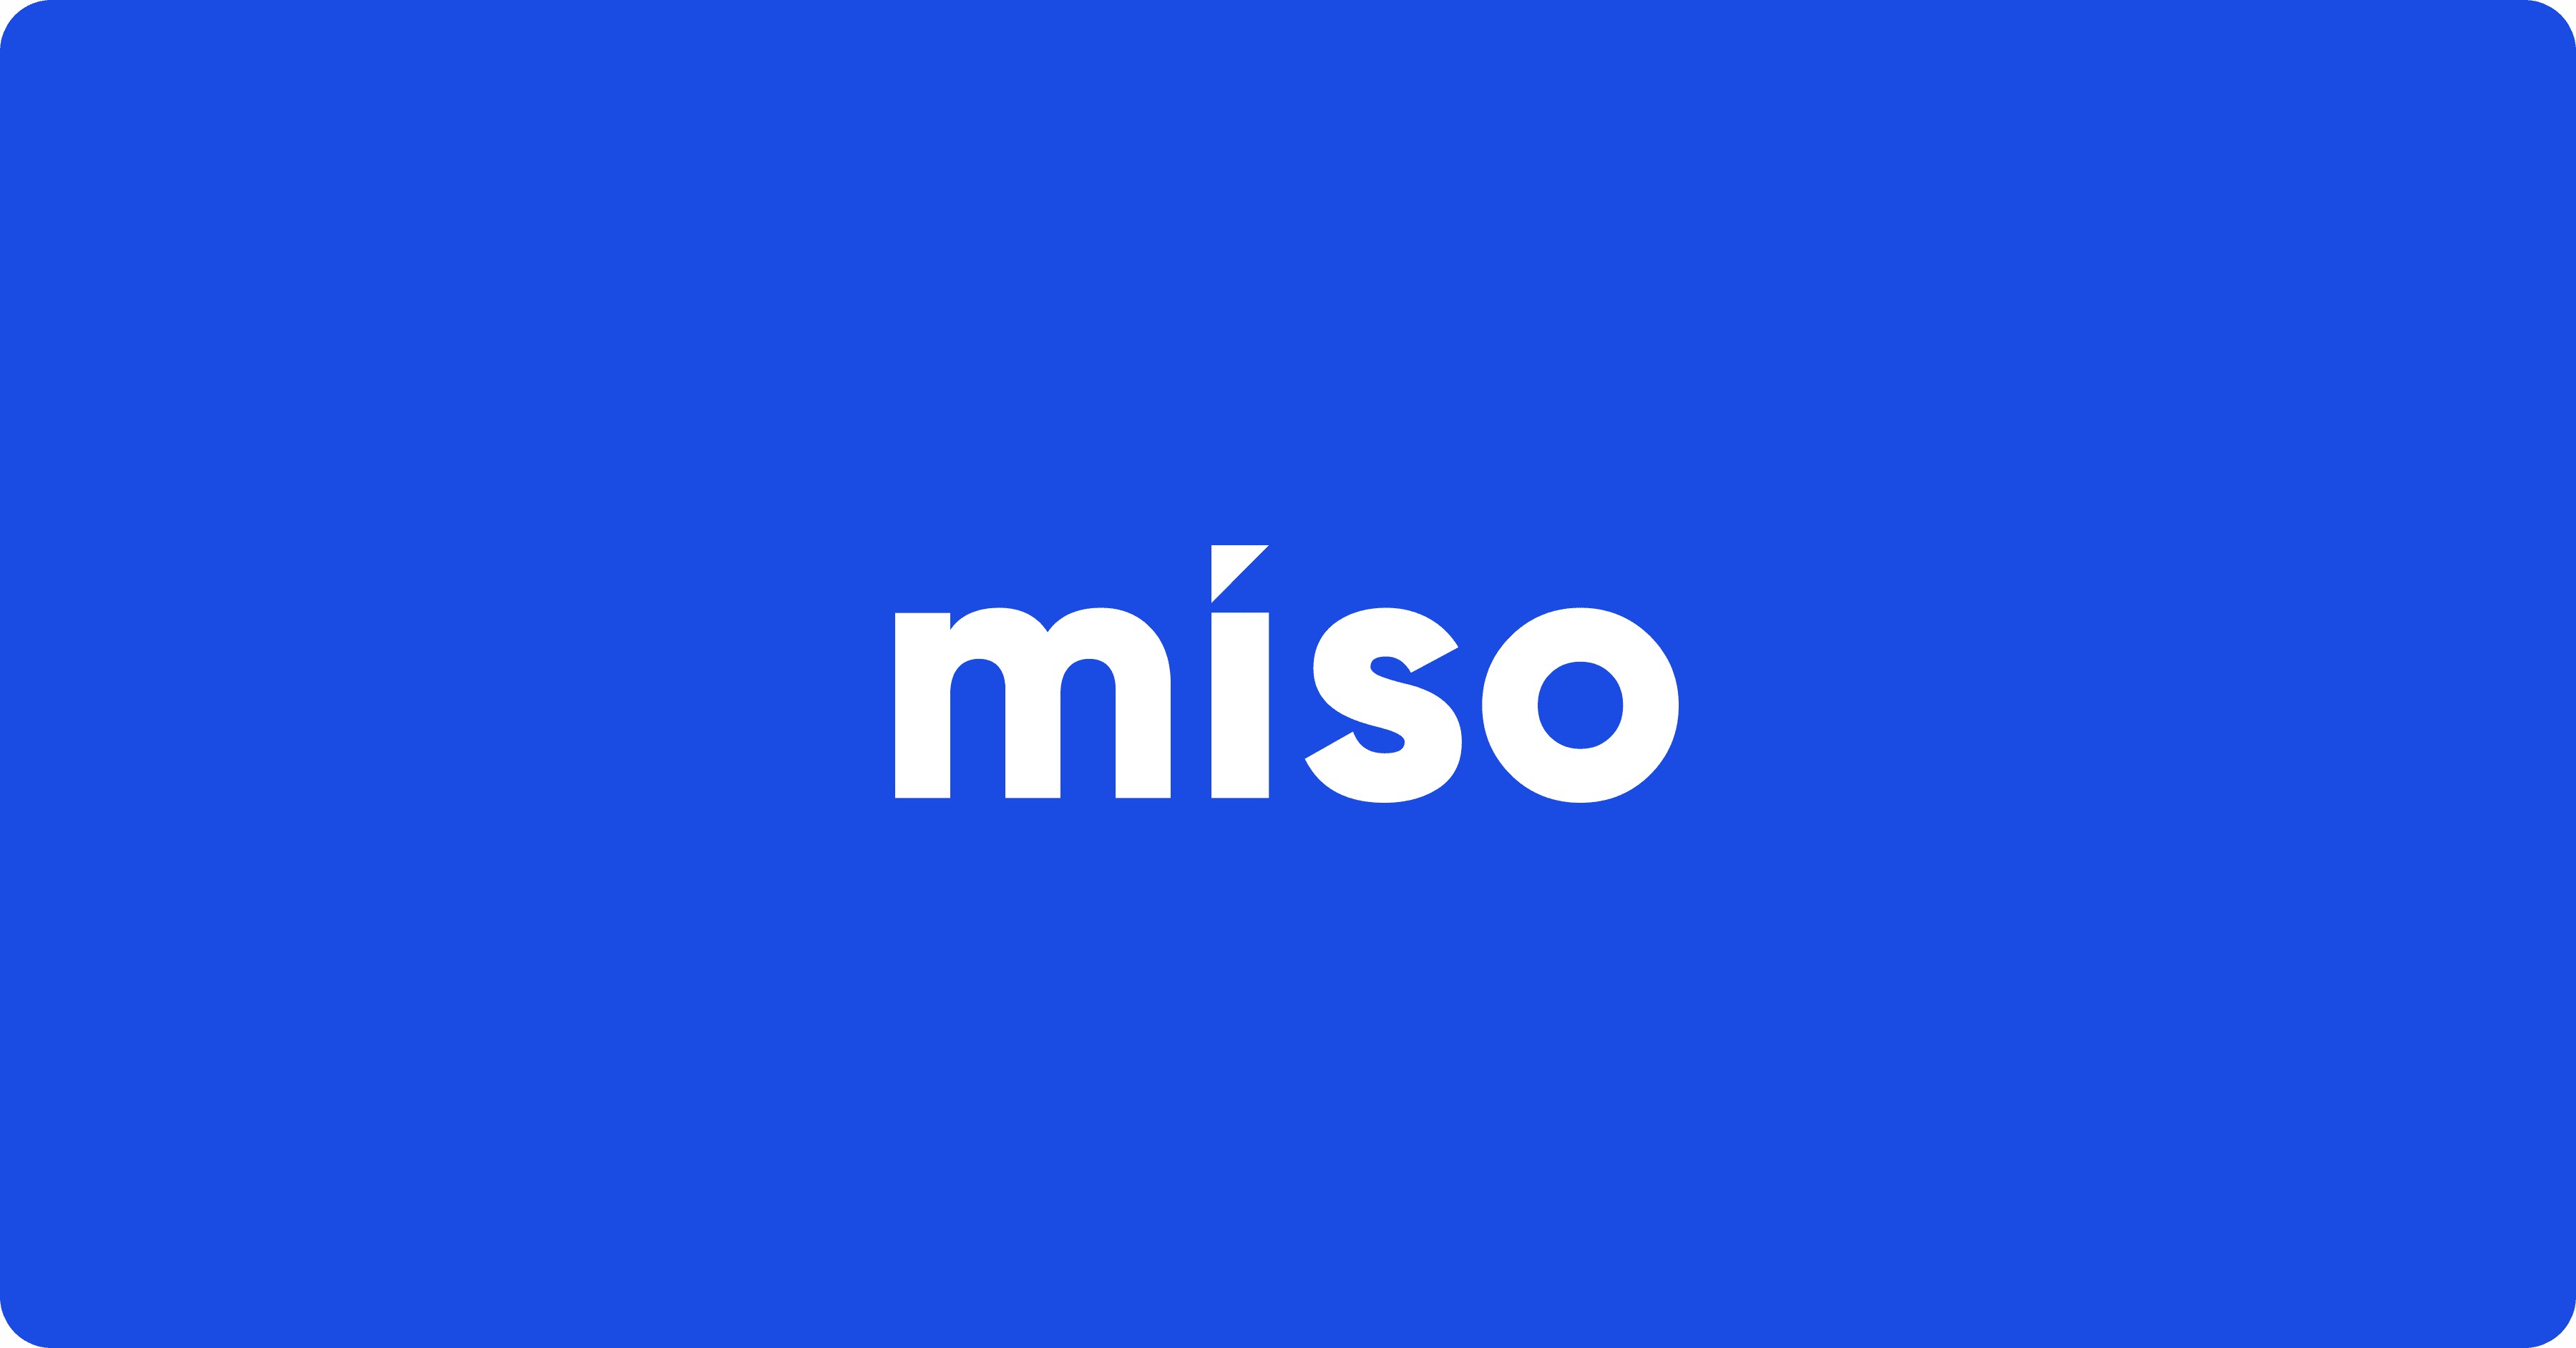 Collect real-time clickstream events from your site using Miso’s client-side SDK for JavaScript